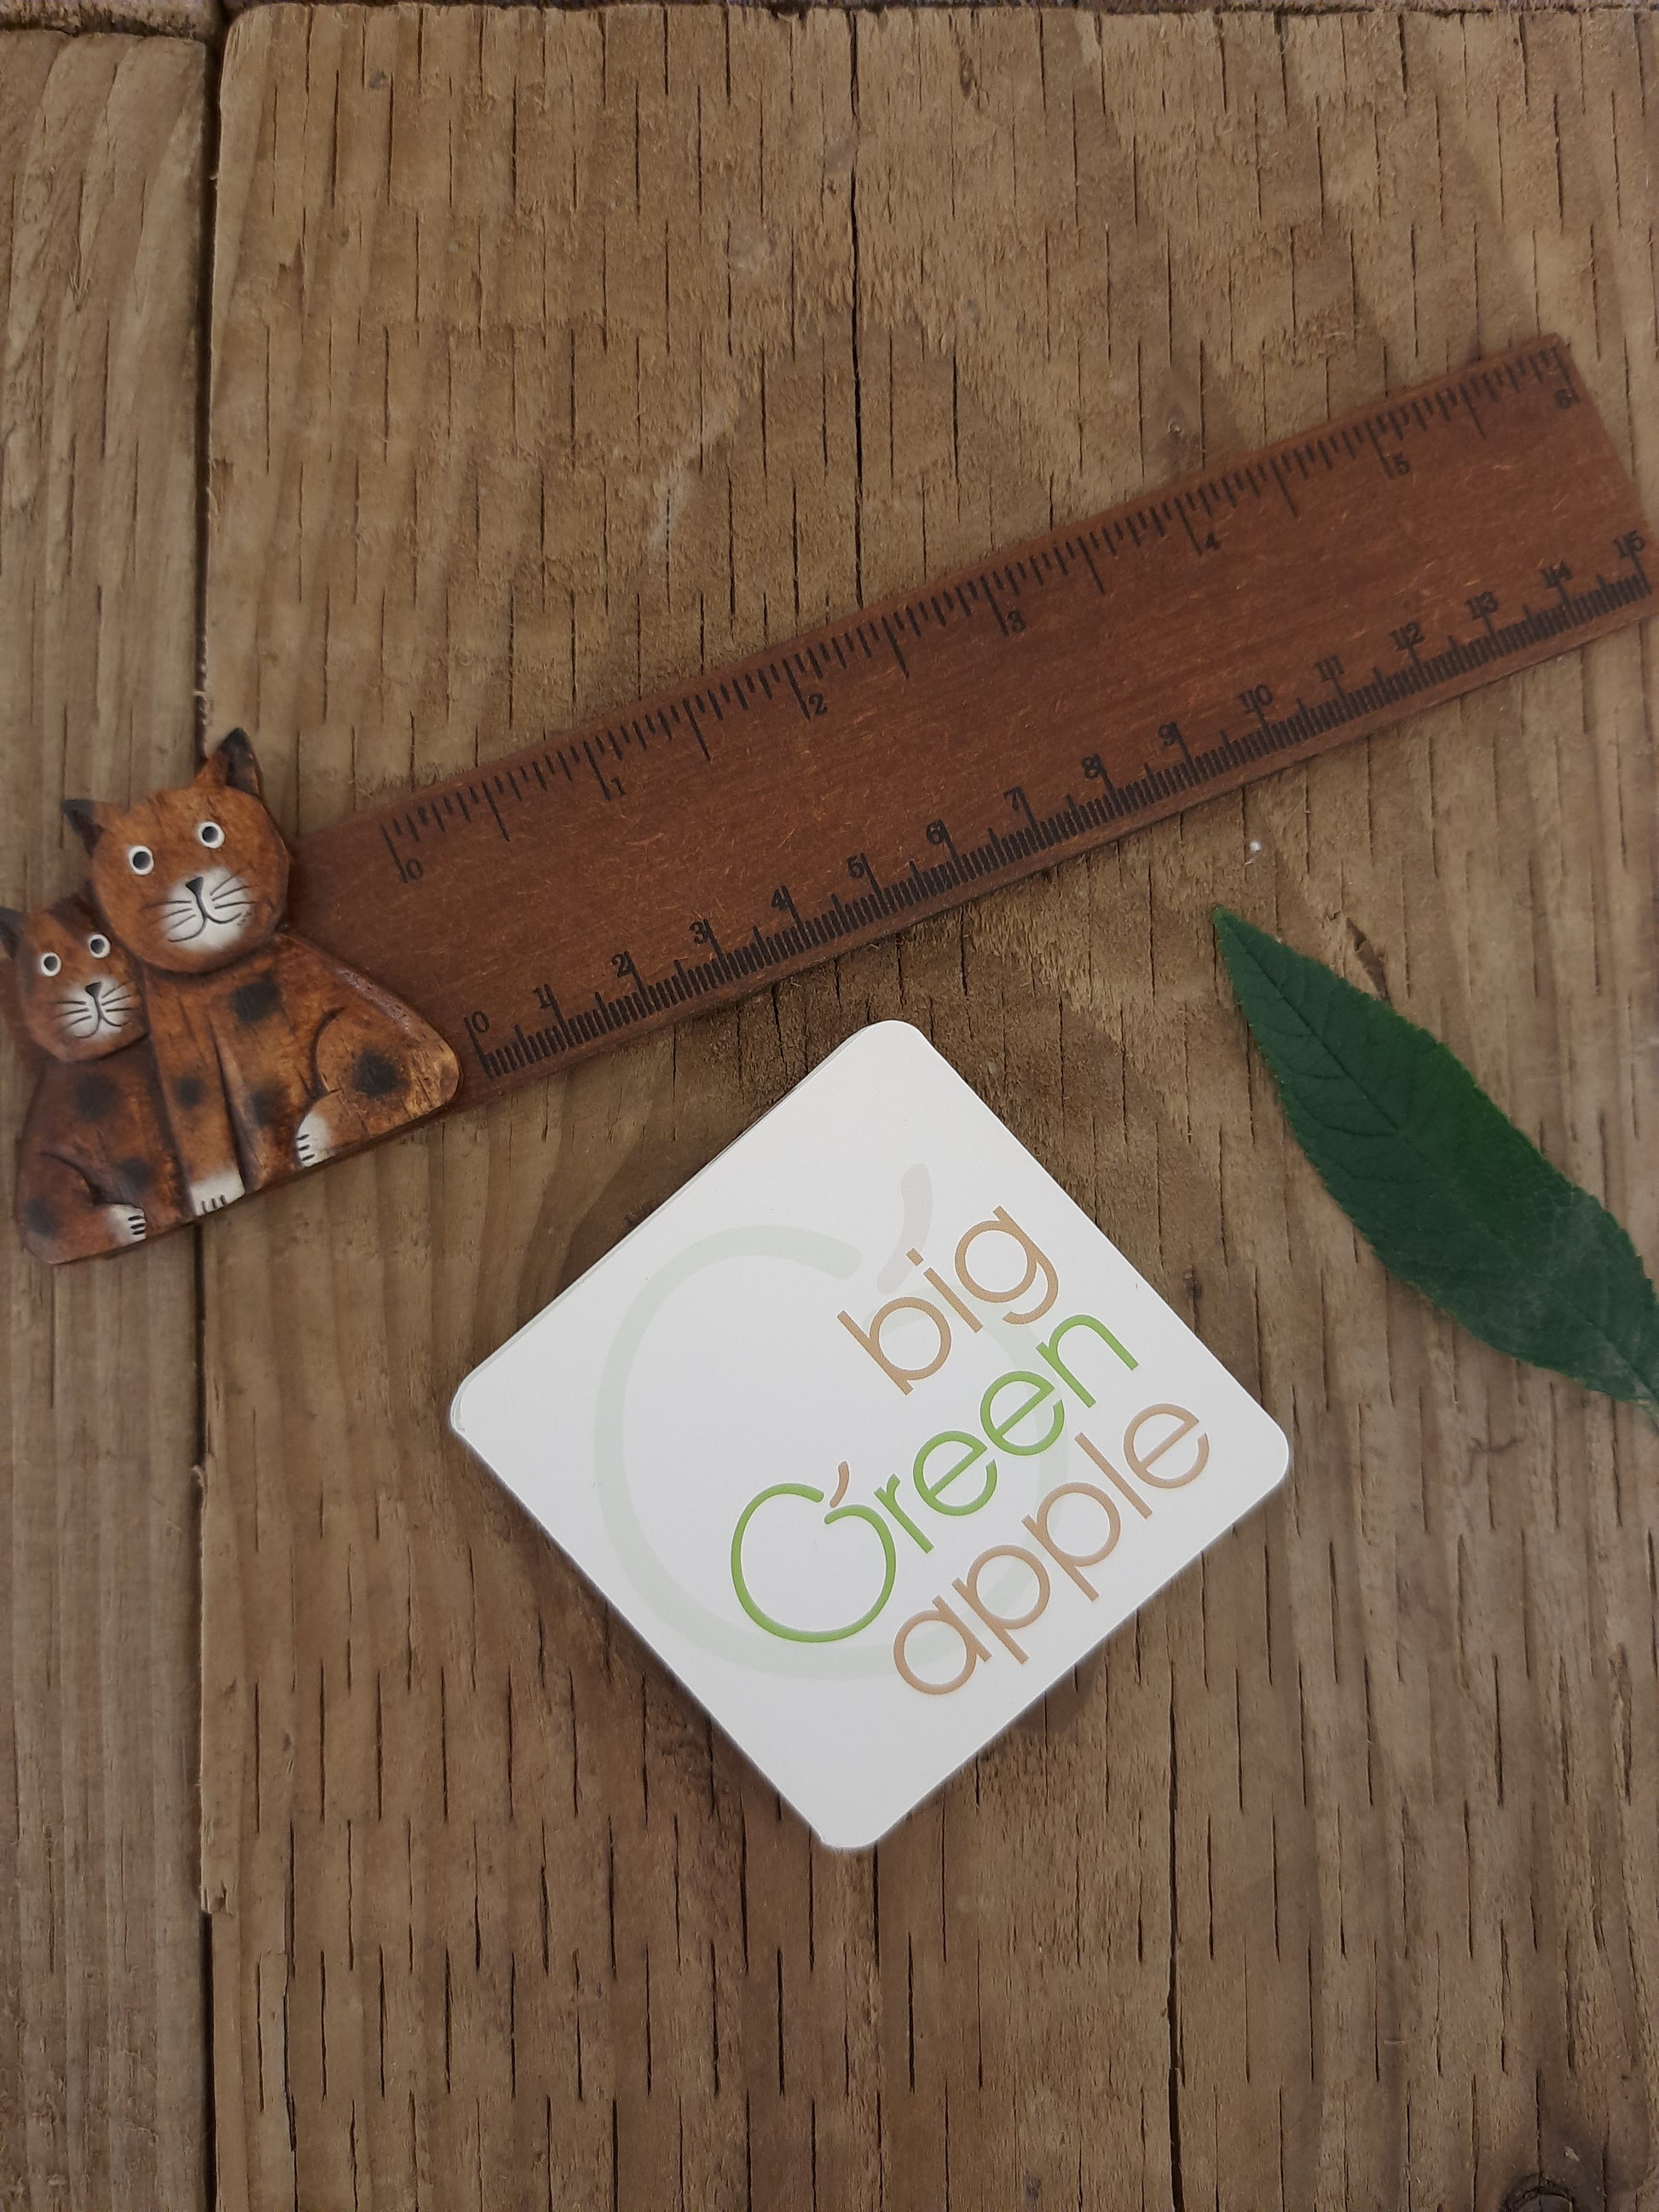 eco friendly gift ideas, wooden fair trade cat ruler, sustainable living, shop ethical